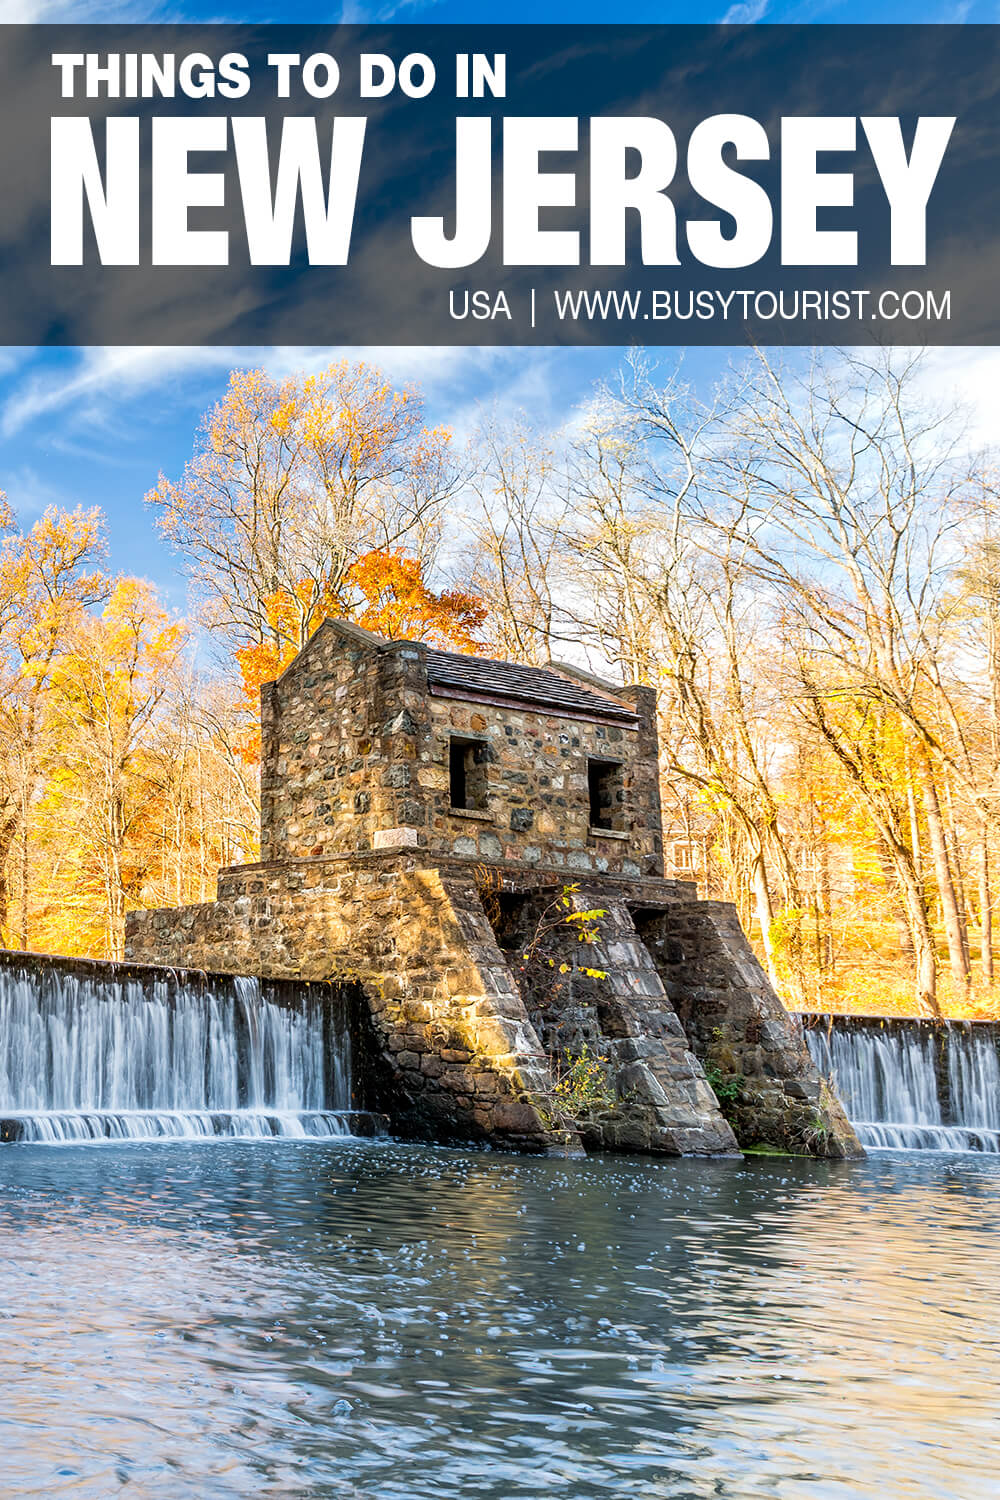 40 Things To Do & Places To Visit In New Jersey - Attractions & Activities